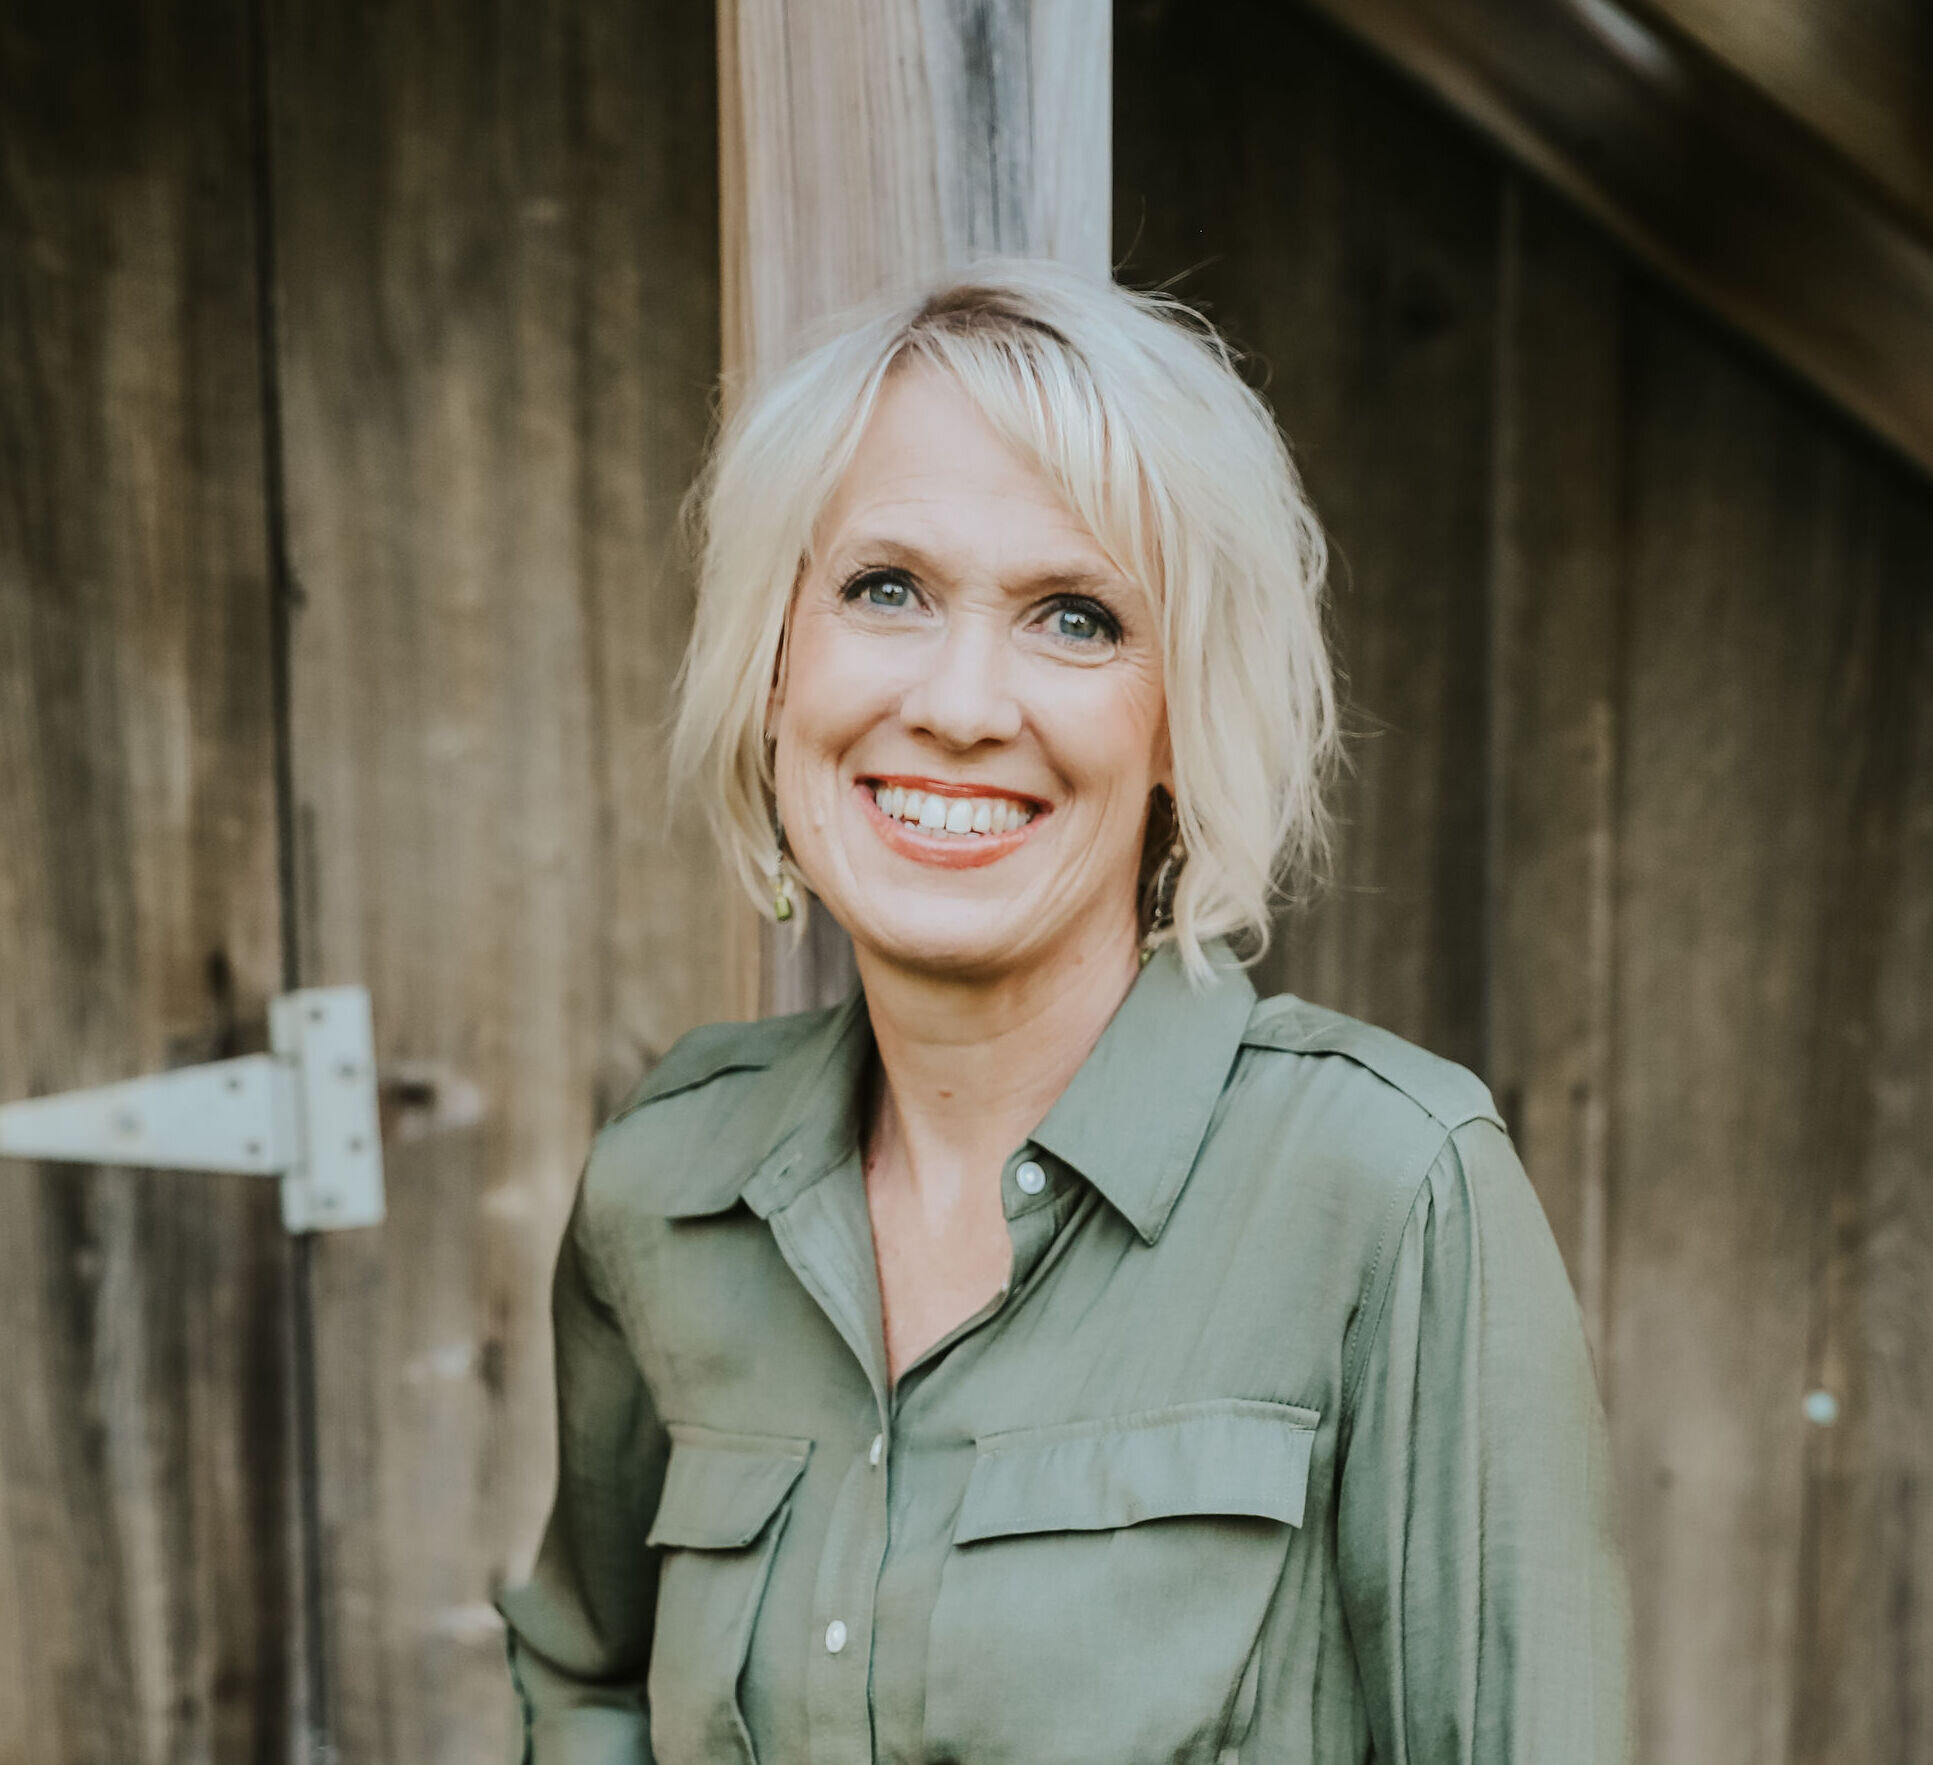 On the Podcast: Praying for your spouse by Valerie Woerner, prayer journal, women's ministry, prayer, refresh, meditation, how to make a prayer journal, praying for your husband, prayer warrior, war room, Bible study, tools, prayer notebook, how to pray, prayer in a noisy world, bible, praying scripture, pray for spouse